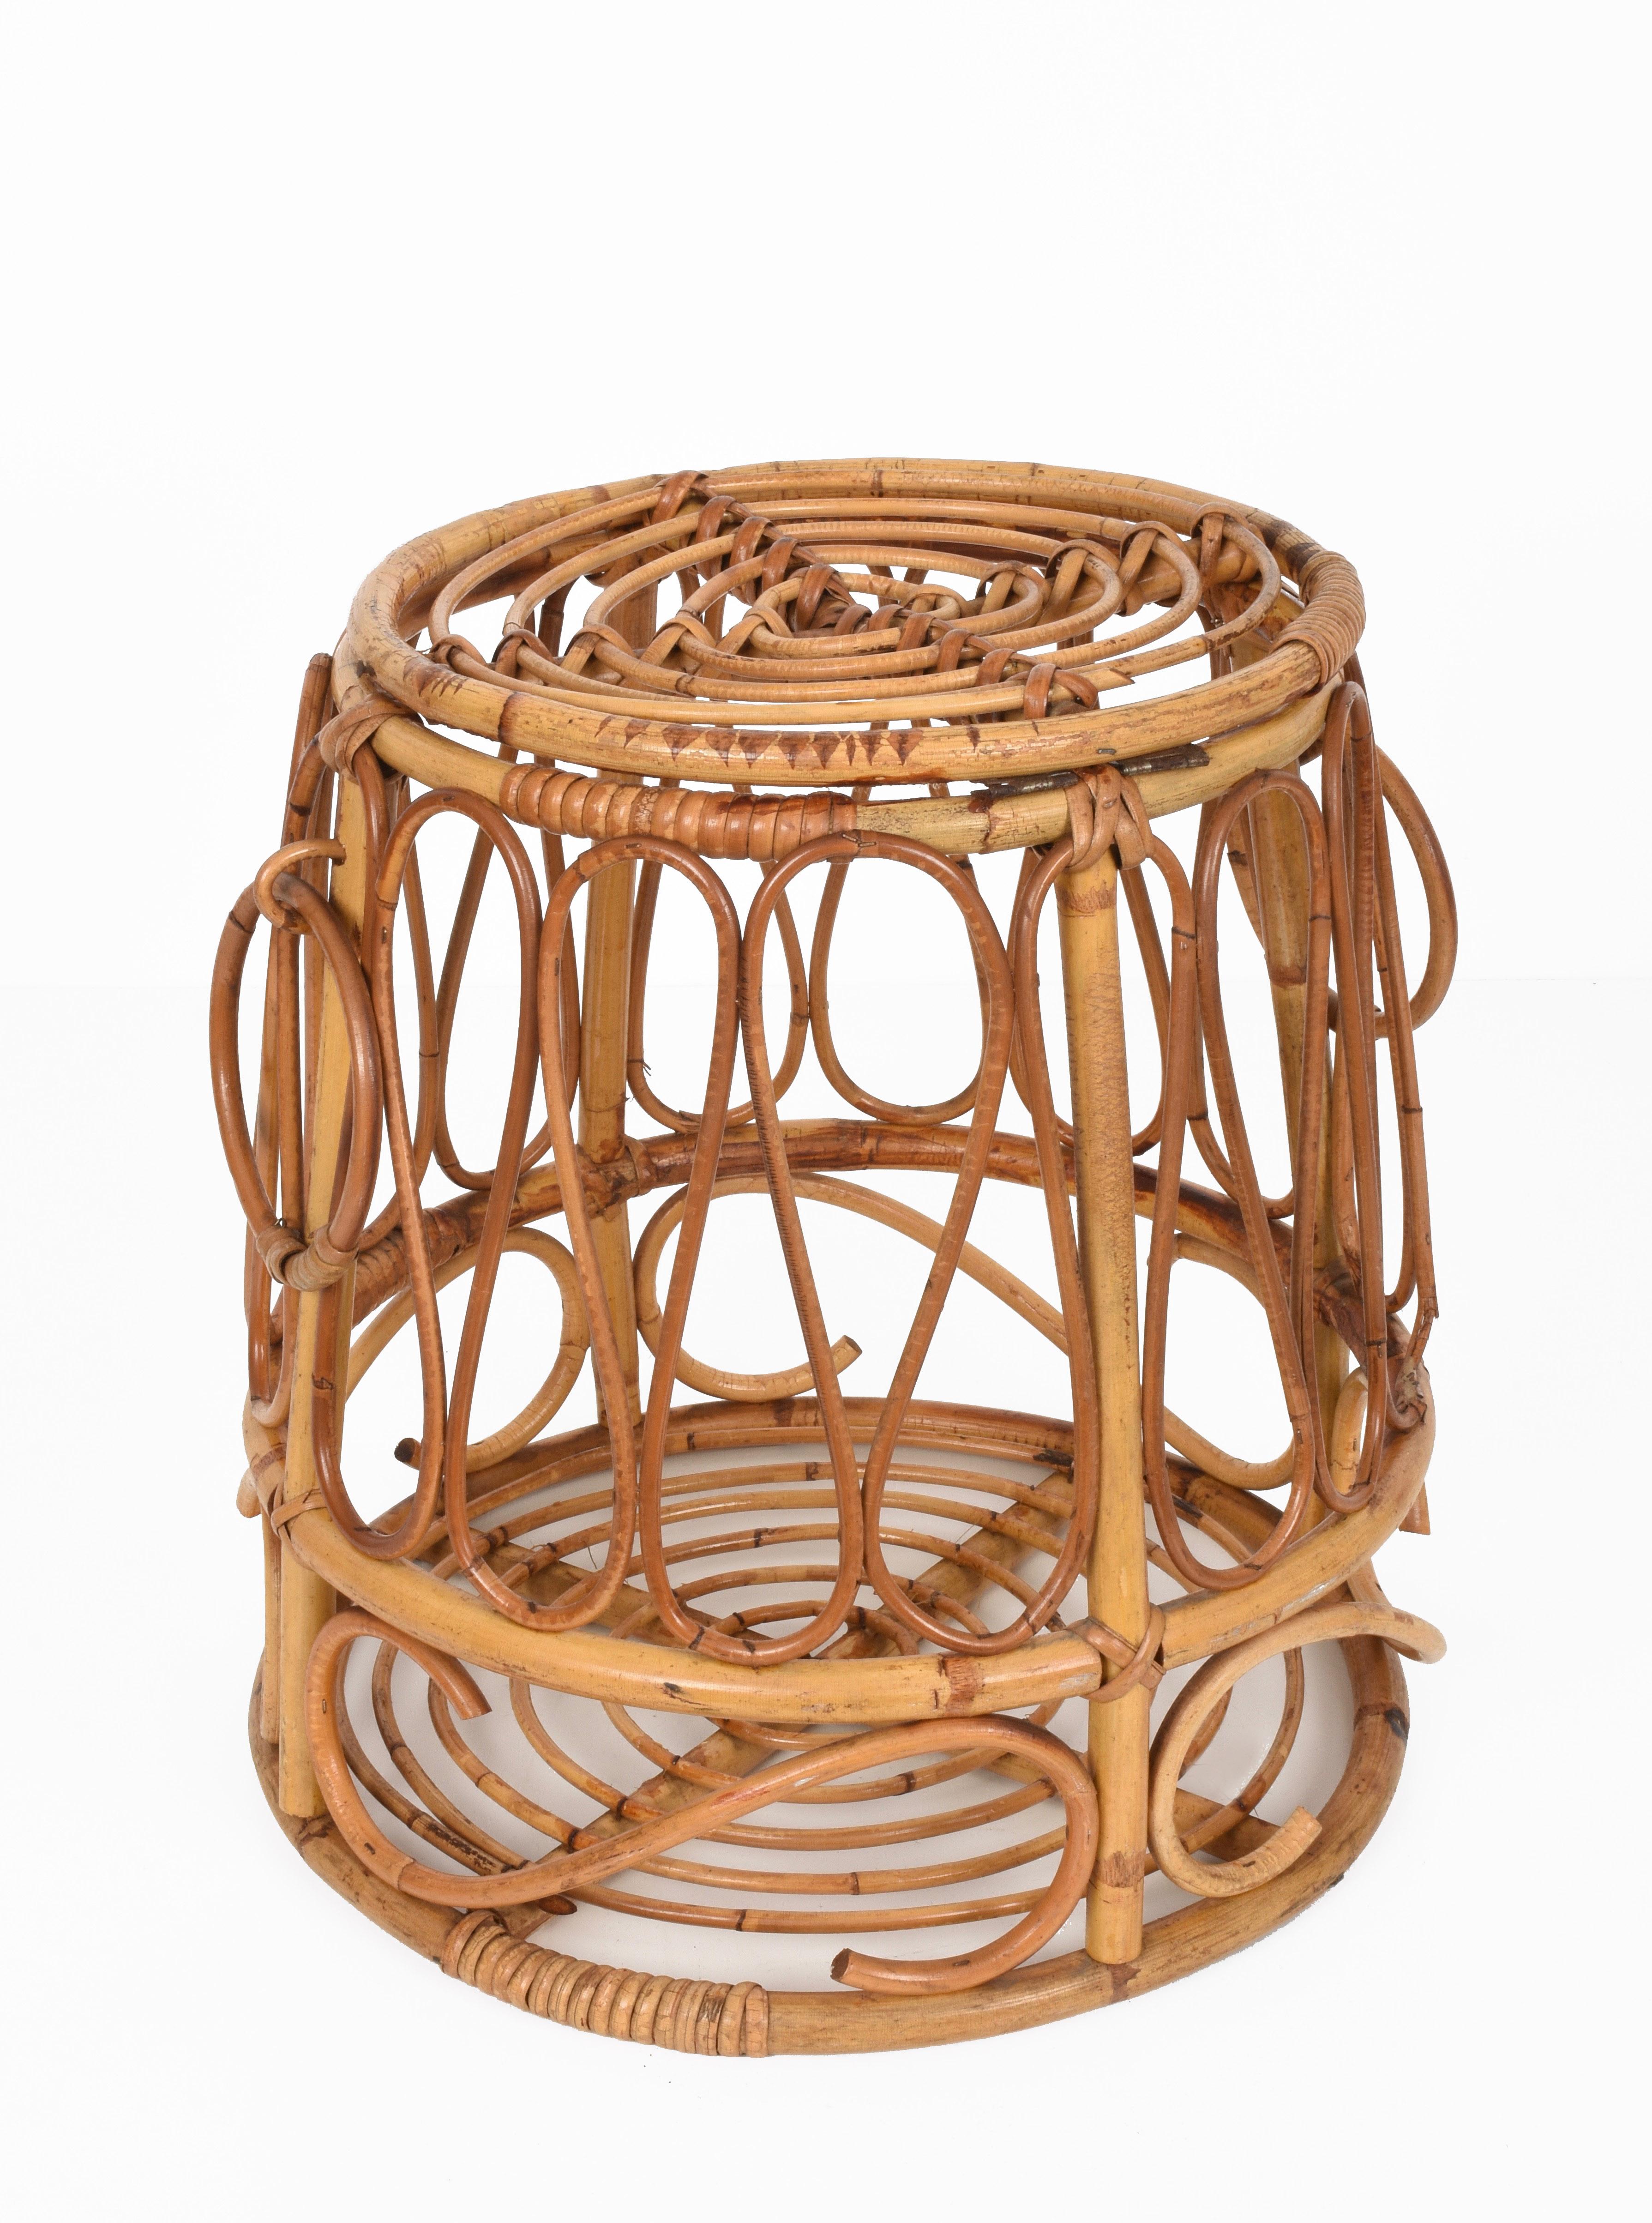 Beautiful midcentury circular storage decorative basket in bamboo and rattan. This amazing item was produced in Italy during the 1950s.

This wonderful piece has a round bamboo frame with rattan trim and two round handles. The top of this basket